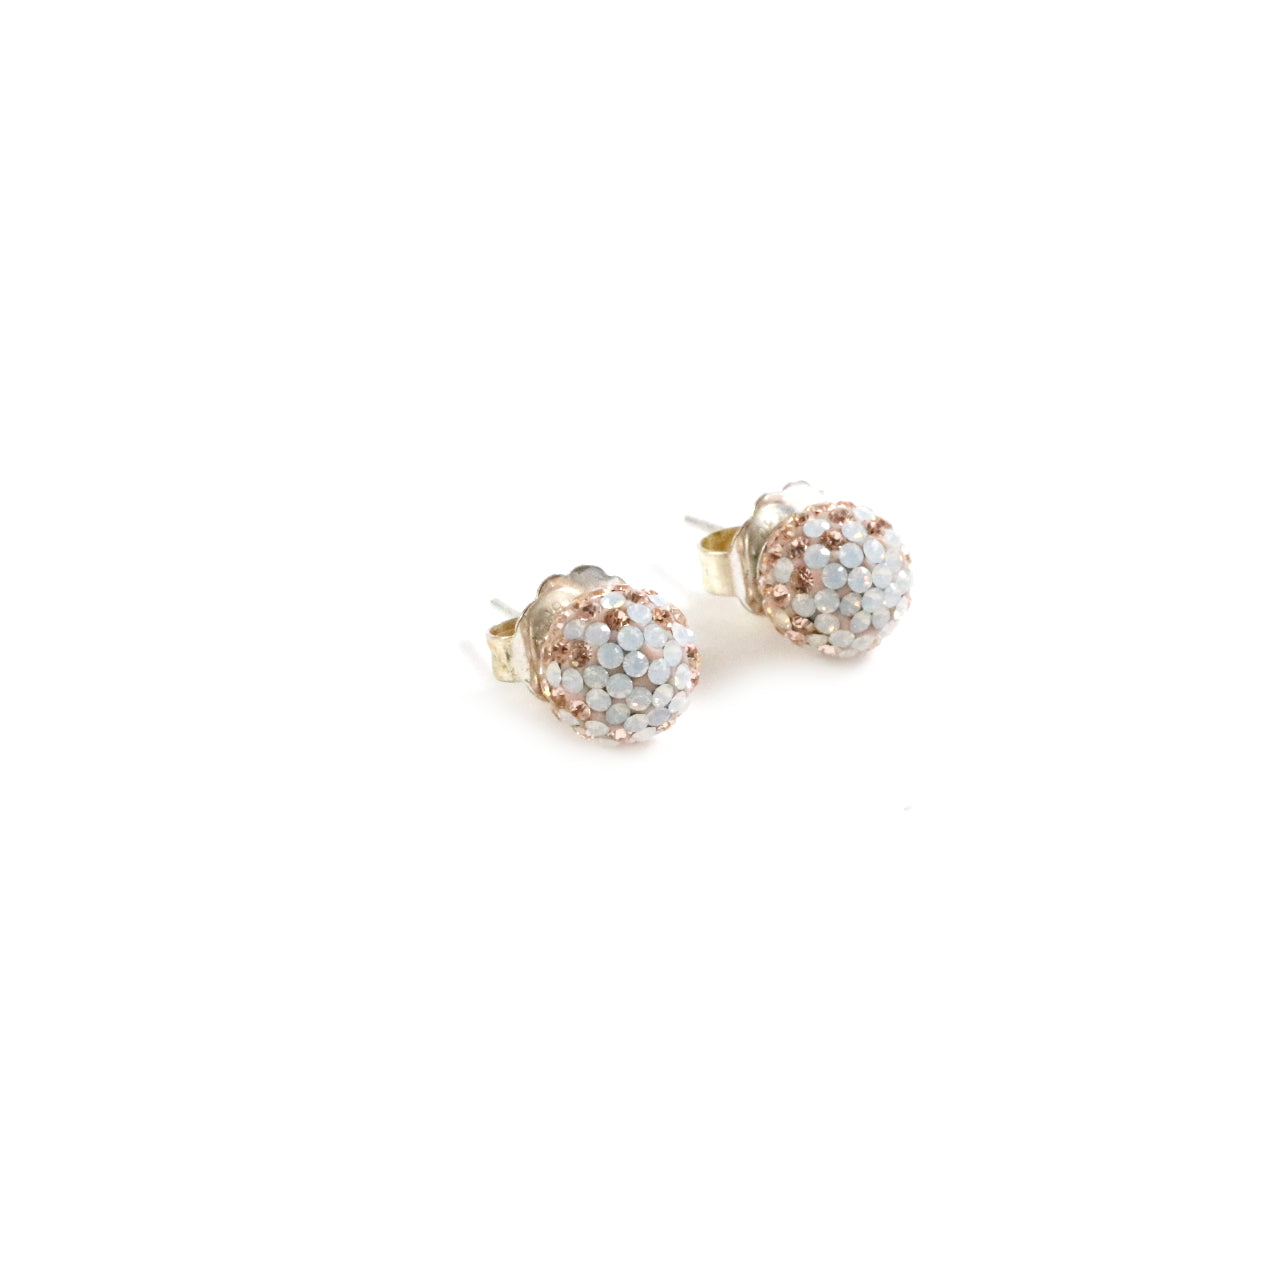 Champagne Fade Sparkle Ball Earrings